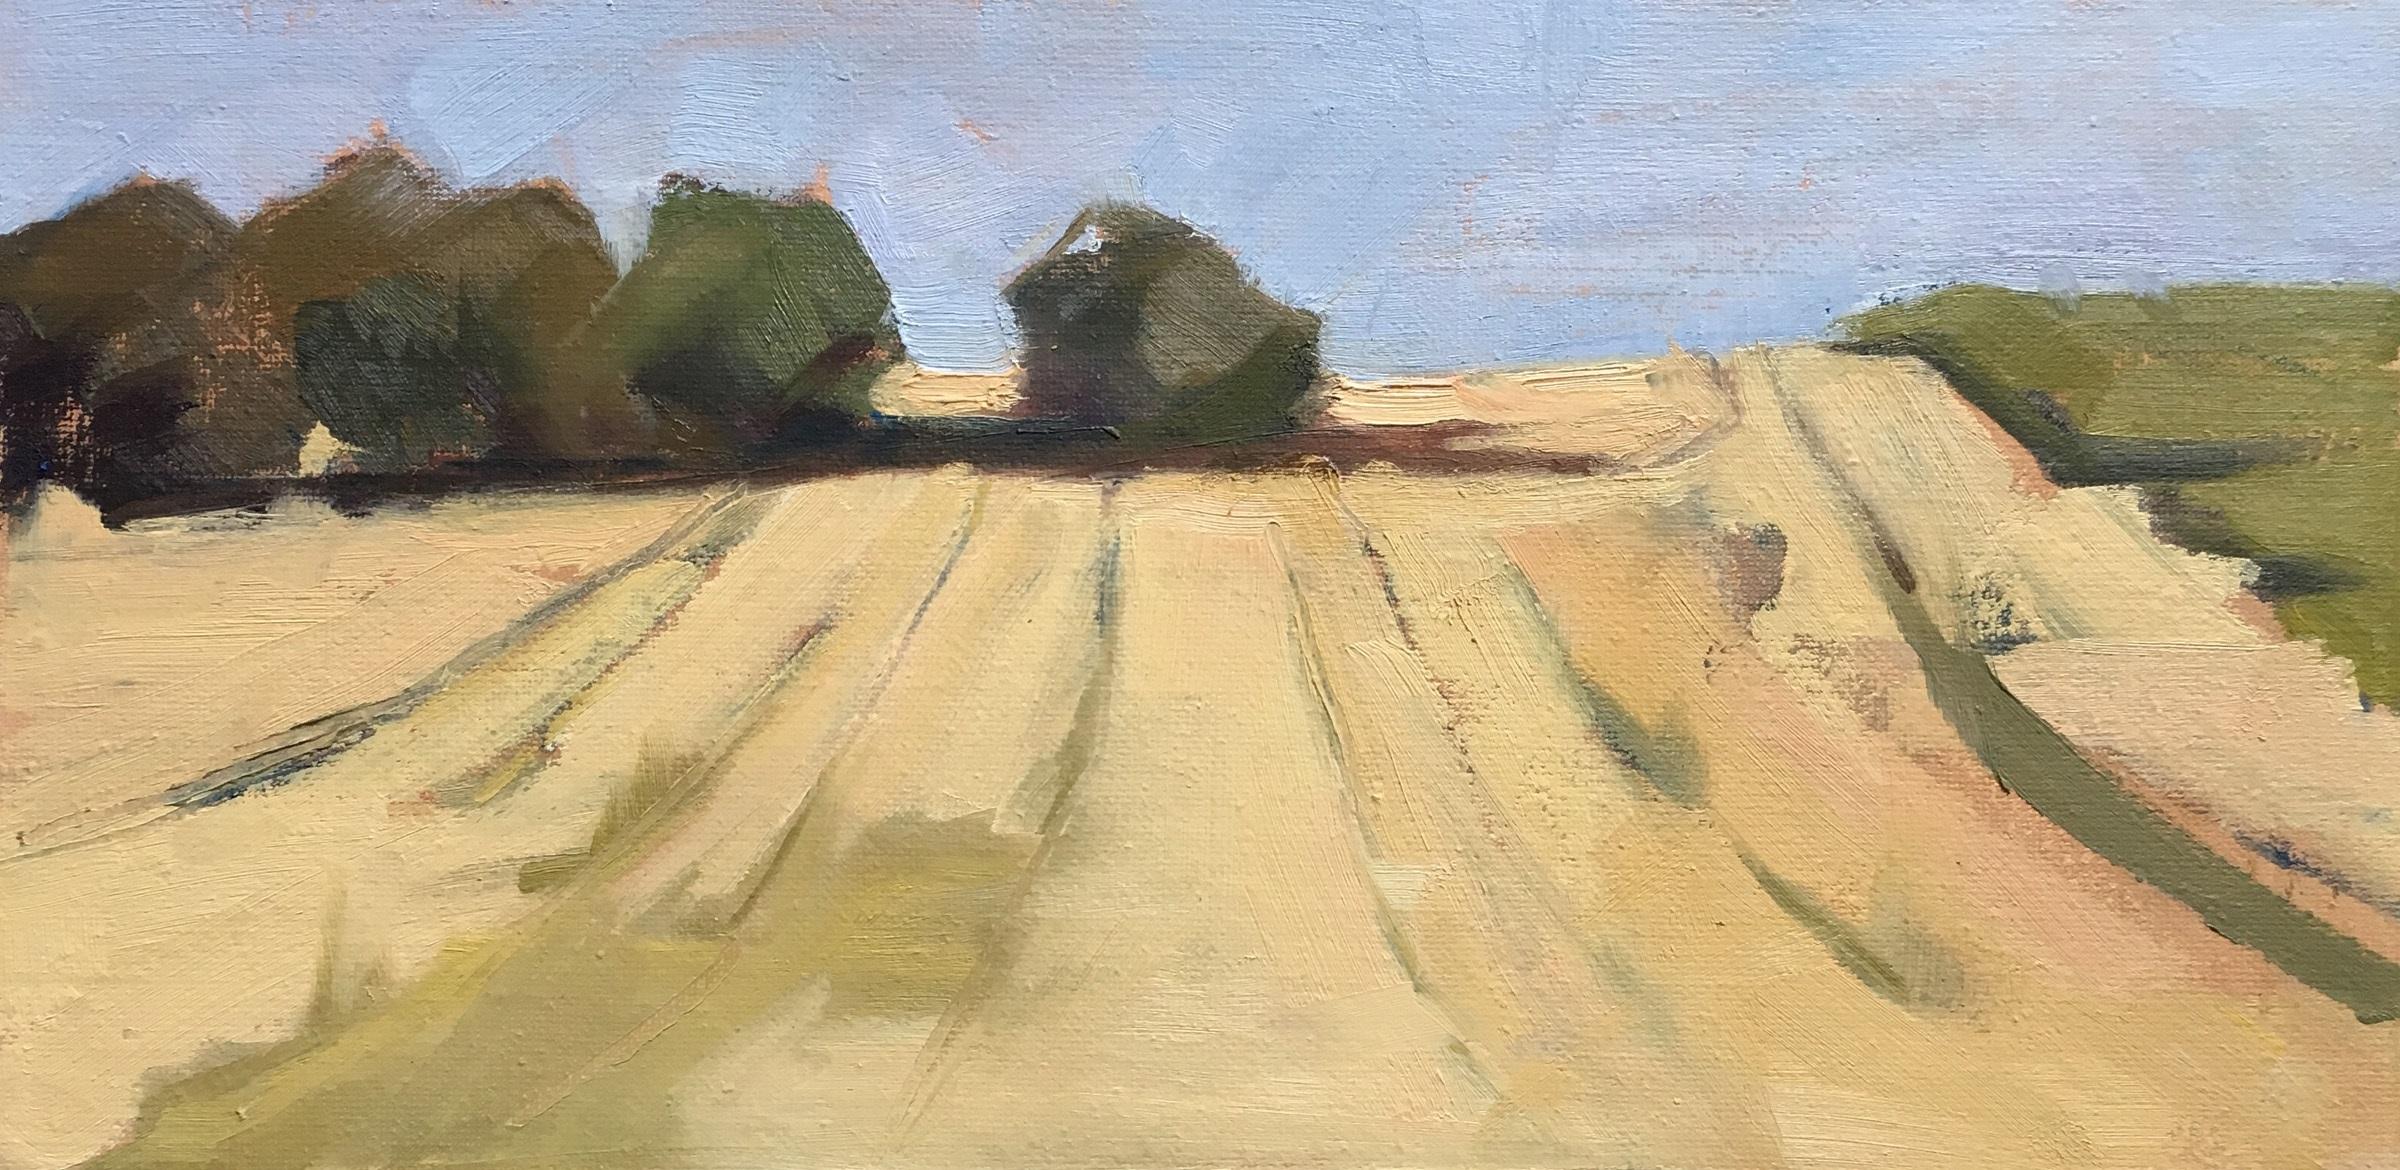 'Fresh Mown Fields' is a small Post-Impressionist oil on linen-wrapped board landscape painting created by American artist Lesley Powell in 2018. Featuring a palette made of soft yellow, green and blue tones, the painting depicts a serene scene.